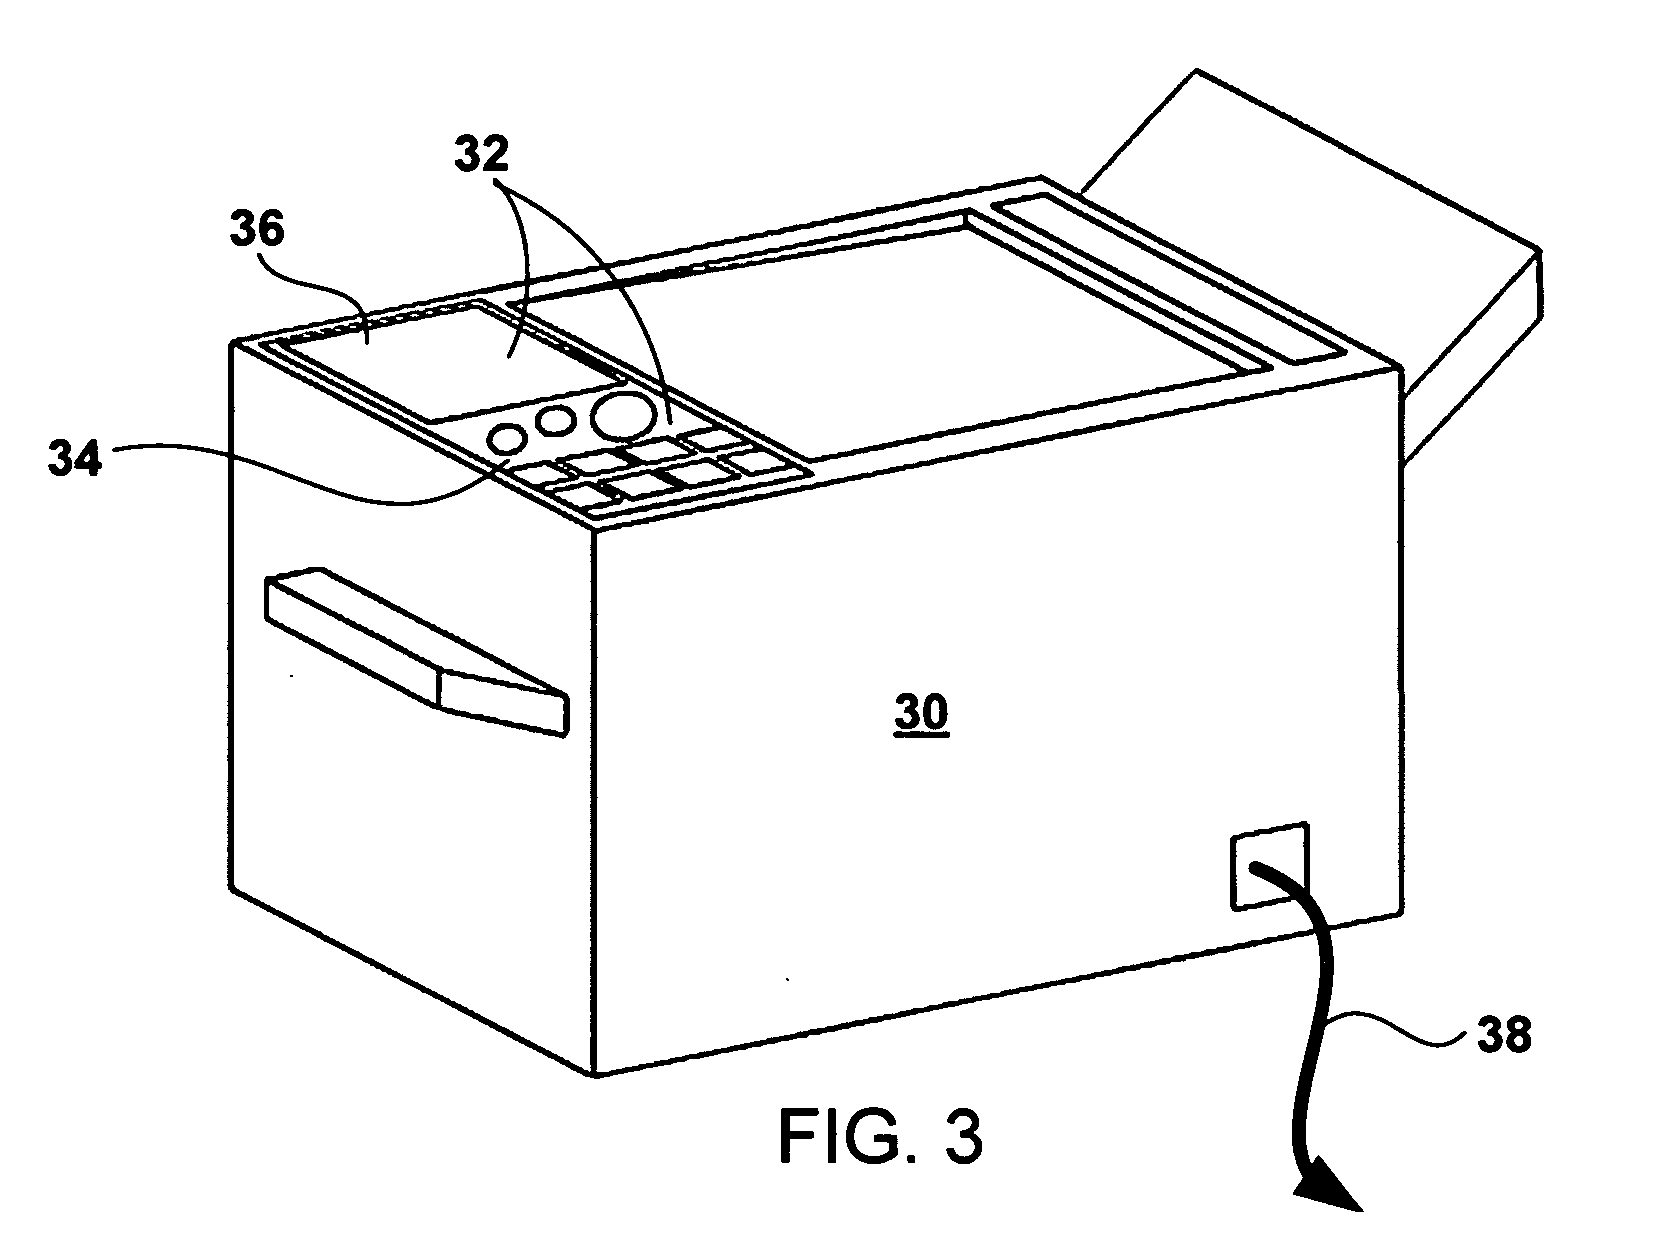 Methods and systems for displaying content on an imaging device